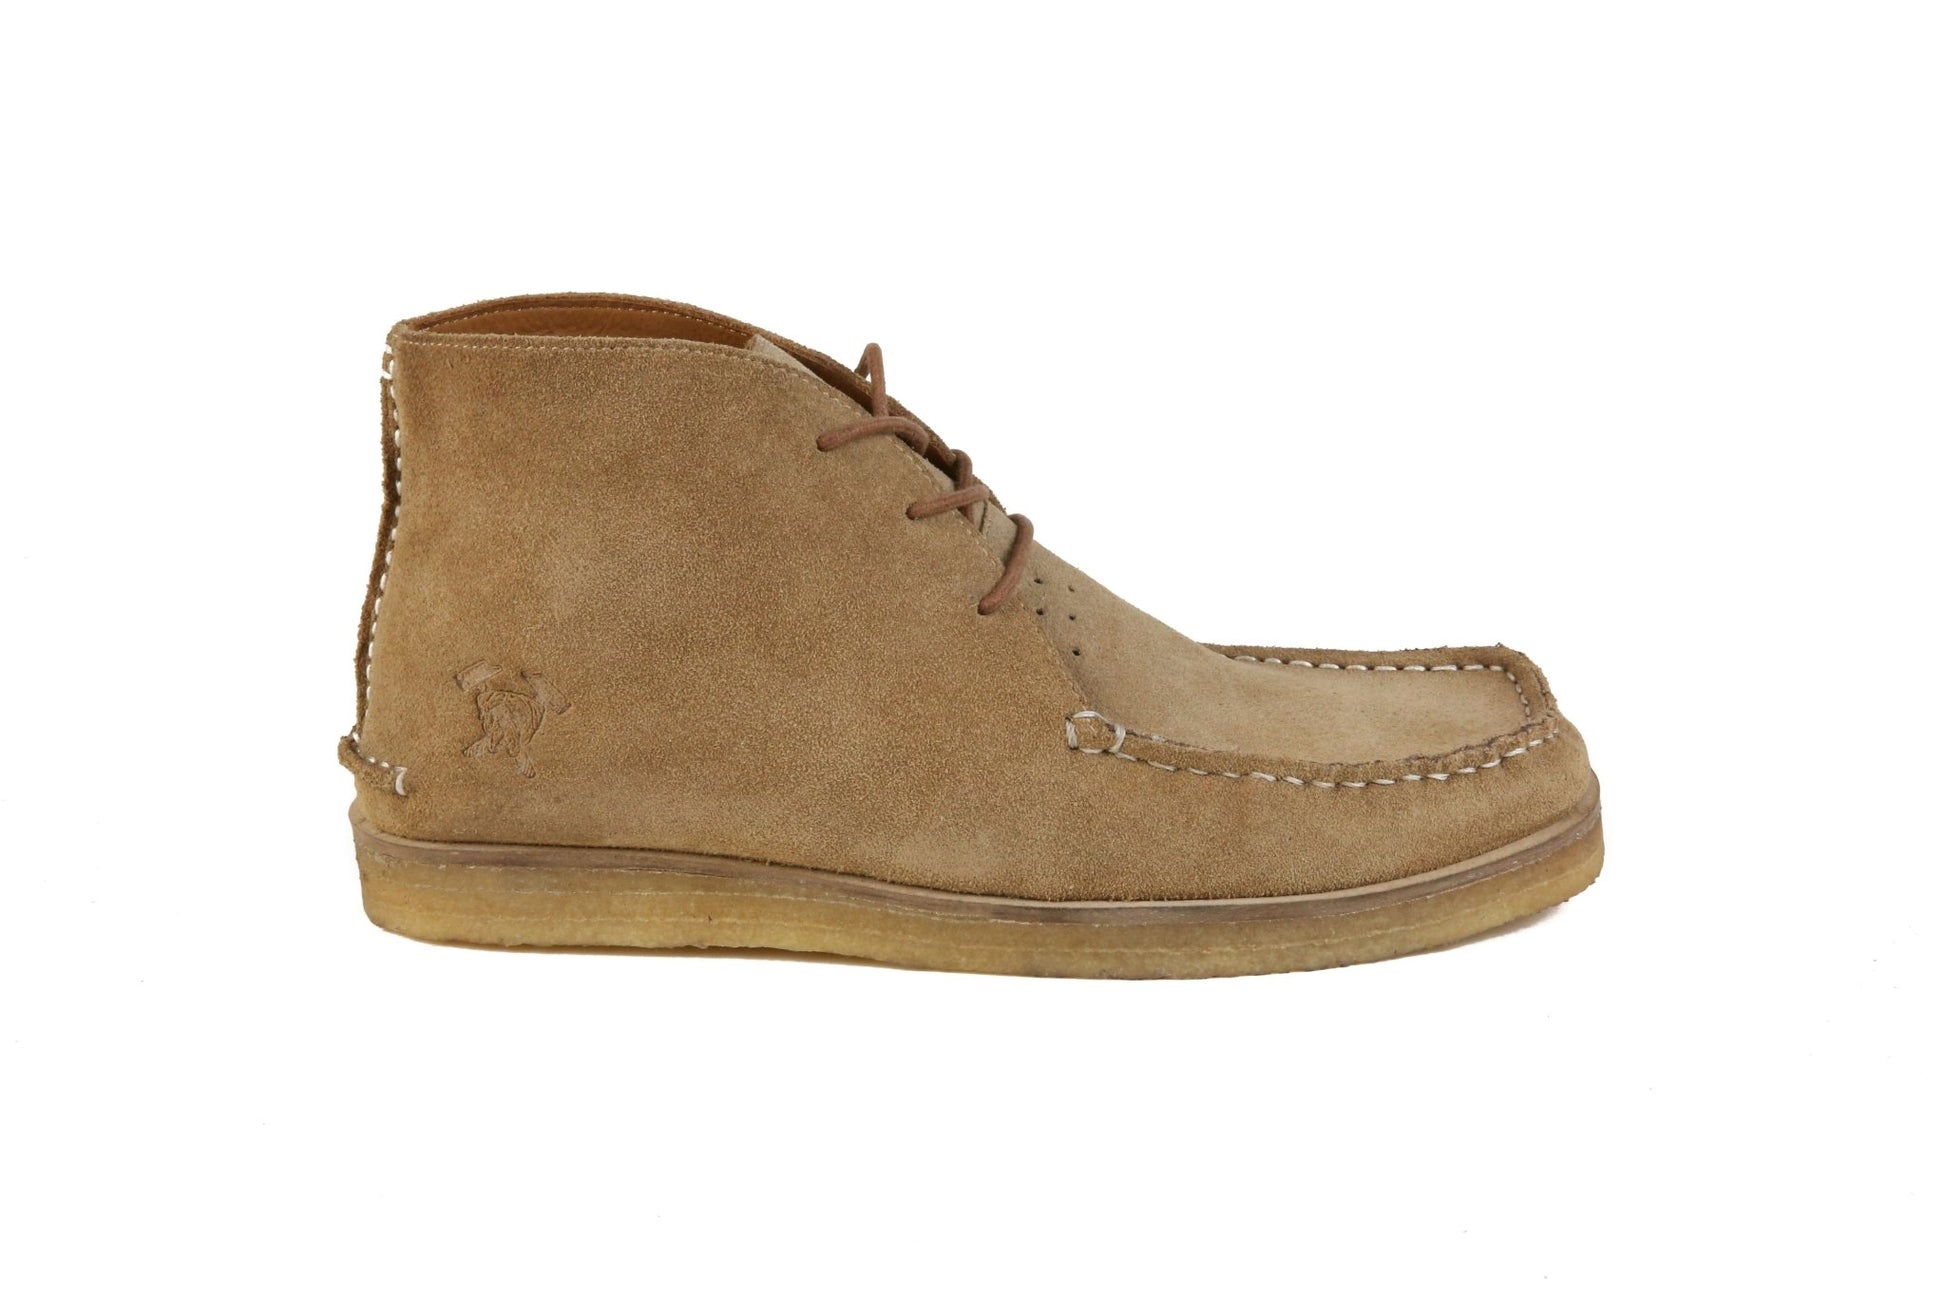 Hound & Hammer The Wallace | Sand Ankle Boots for Men - Men - Footwear - Boots - Ankle Boots - Benn~Burry